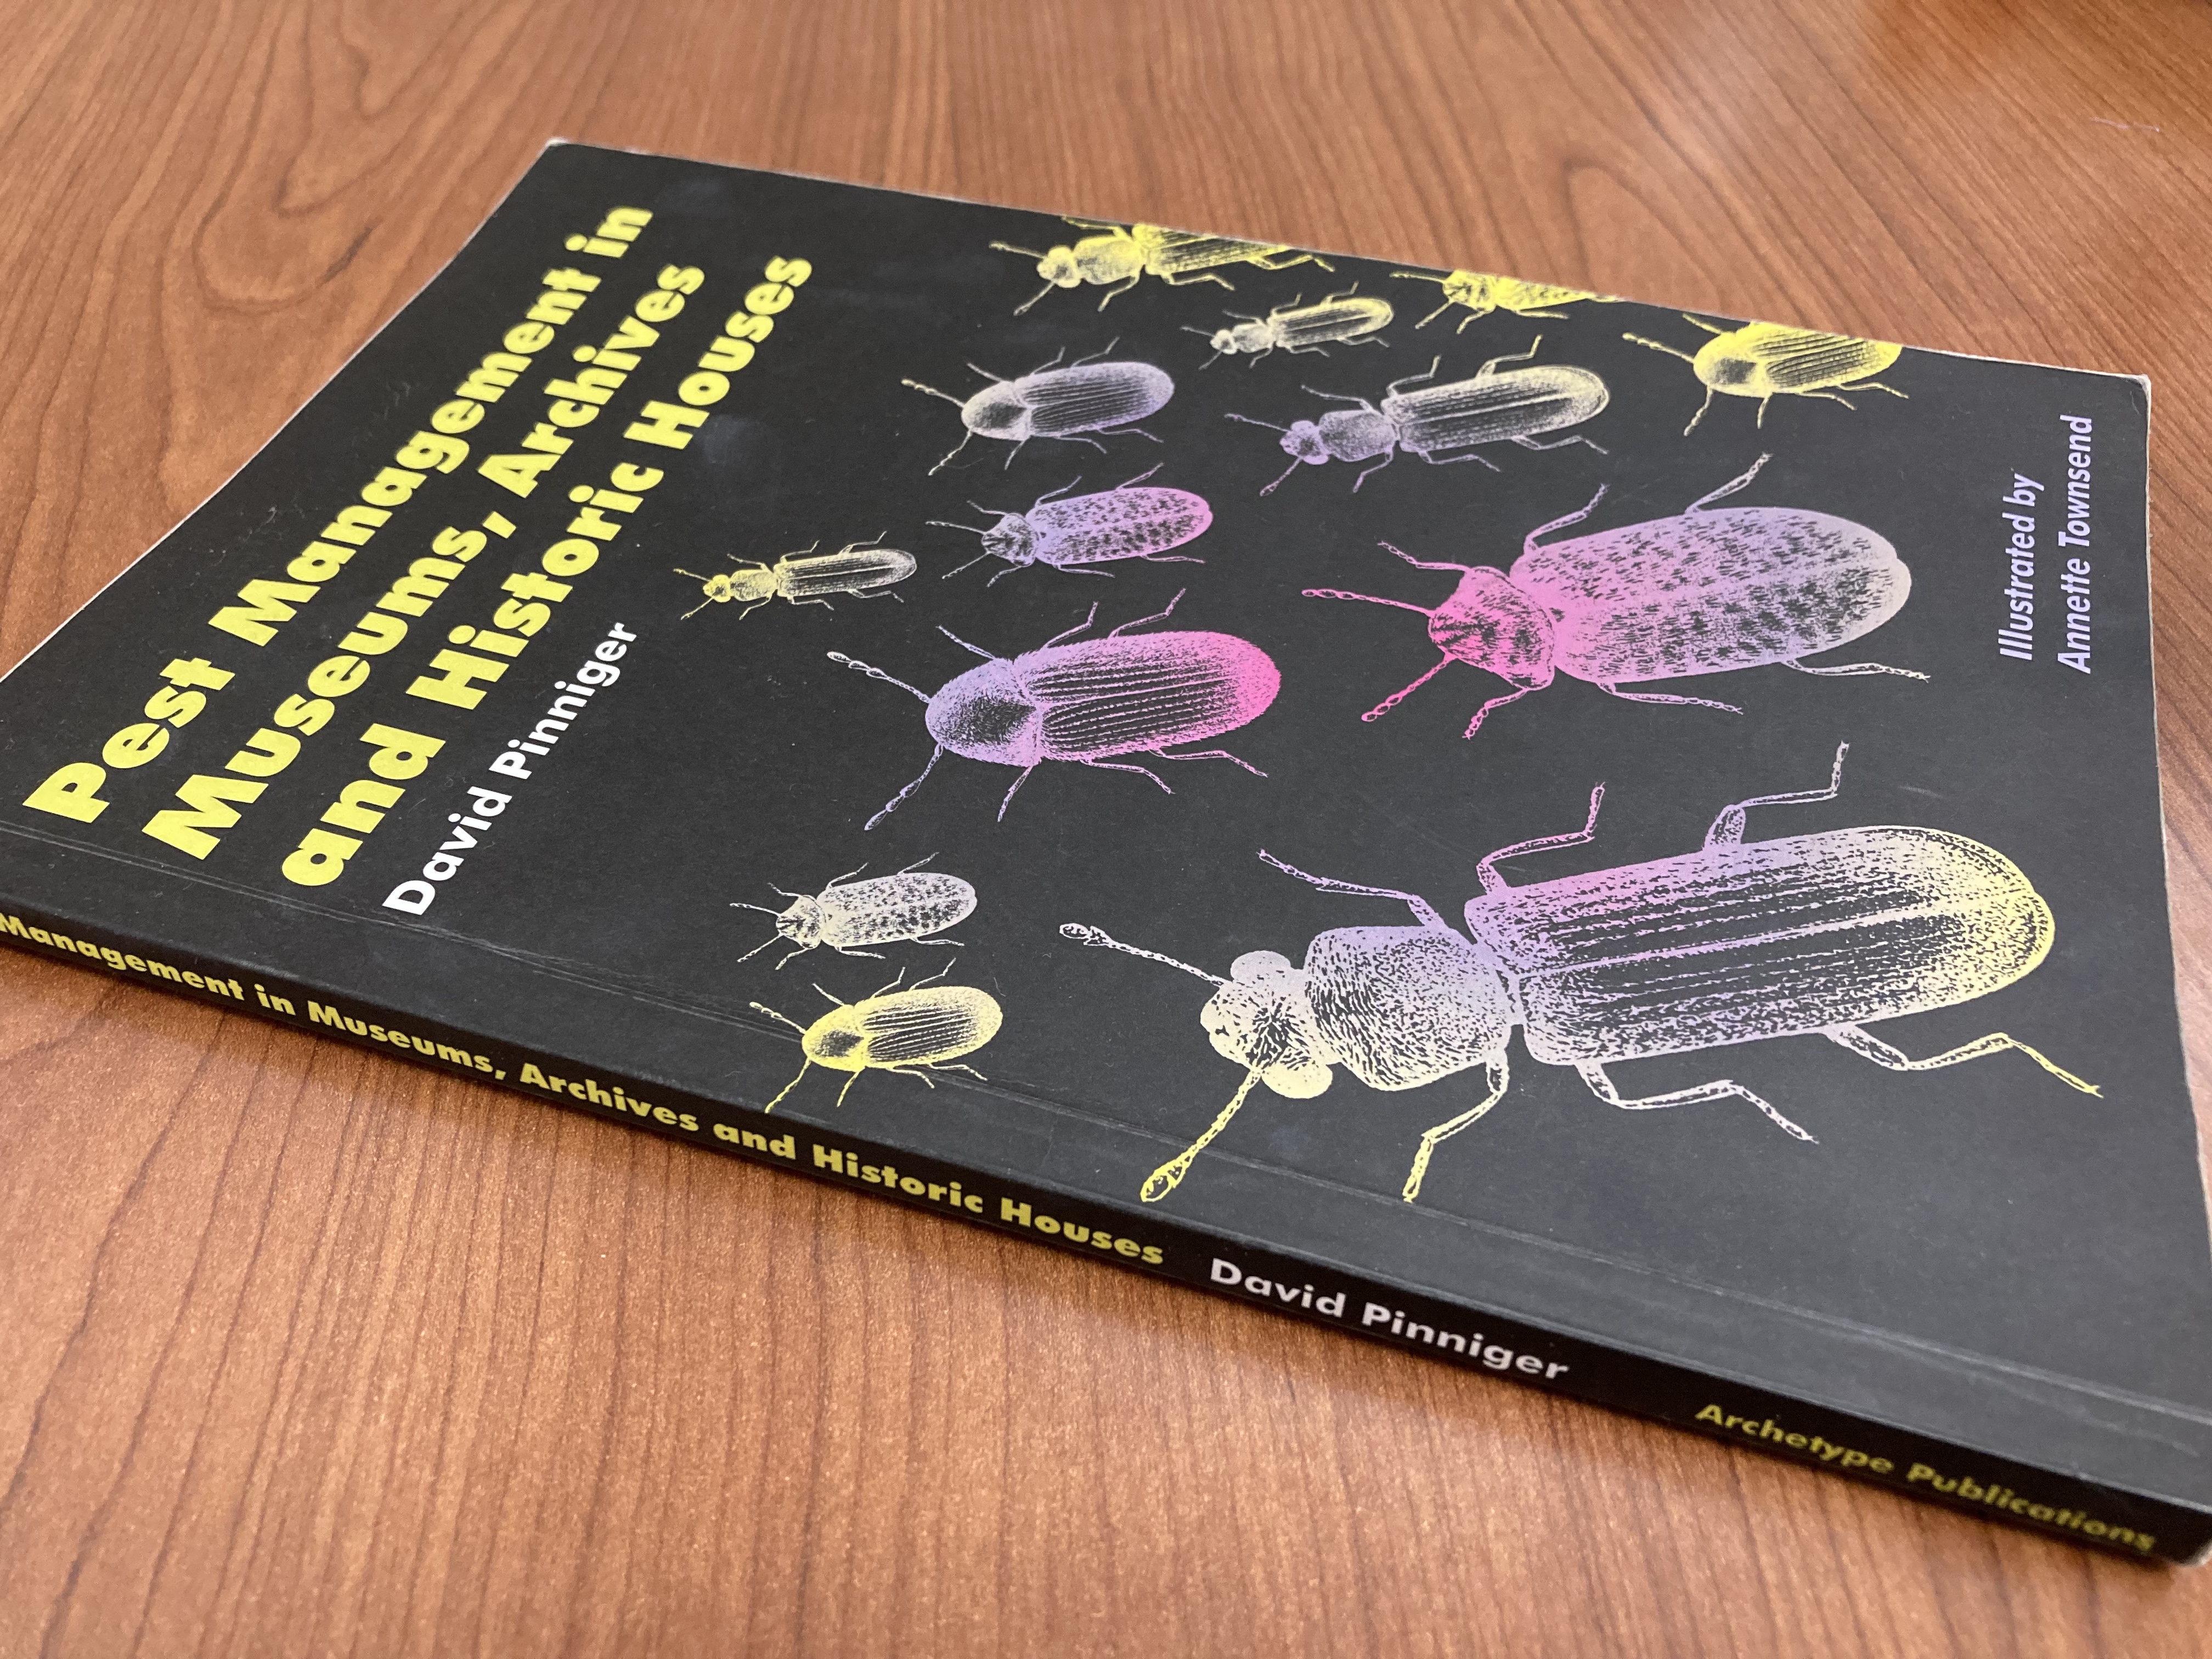 A book by David Pinniger titled, “Pest Management in Museums, Archives and Historic Houses.” The book is a black paperback with yellow and white lettering and drawings of beetles on the cover. 